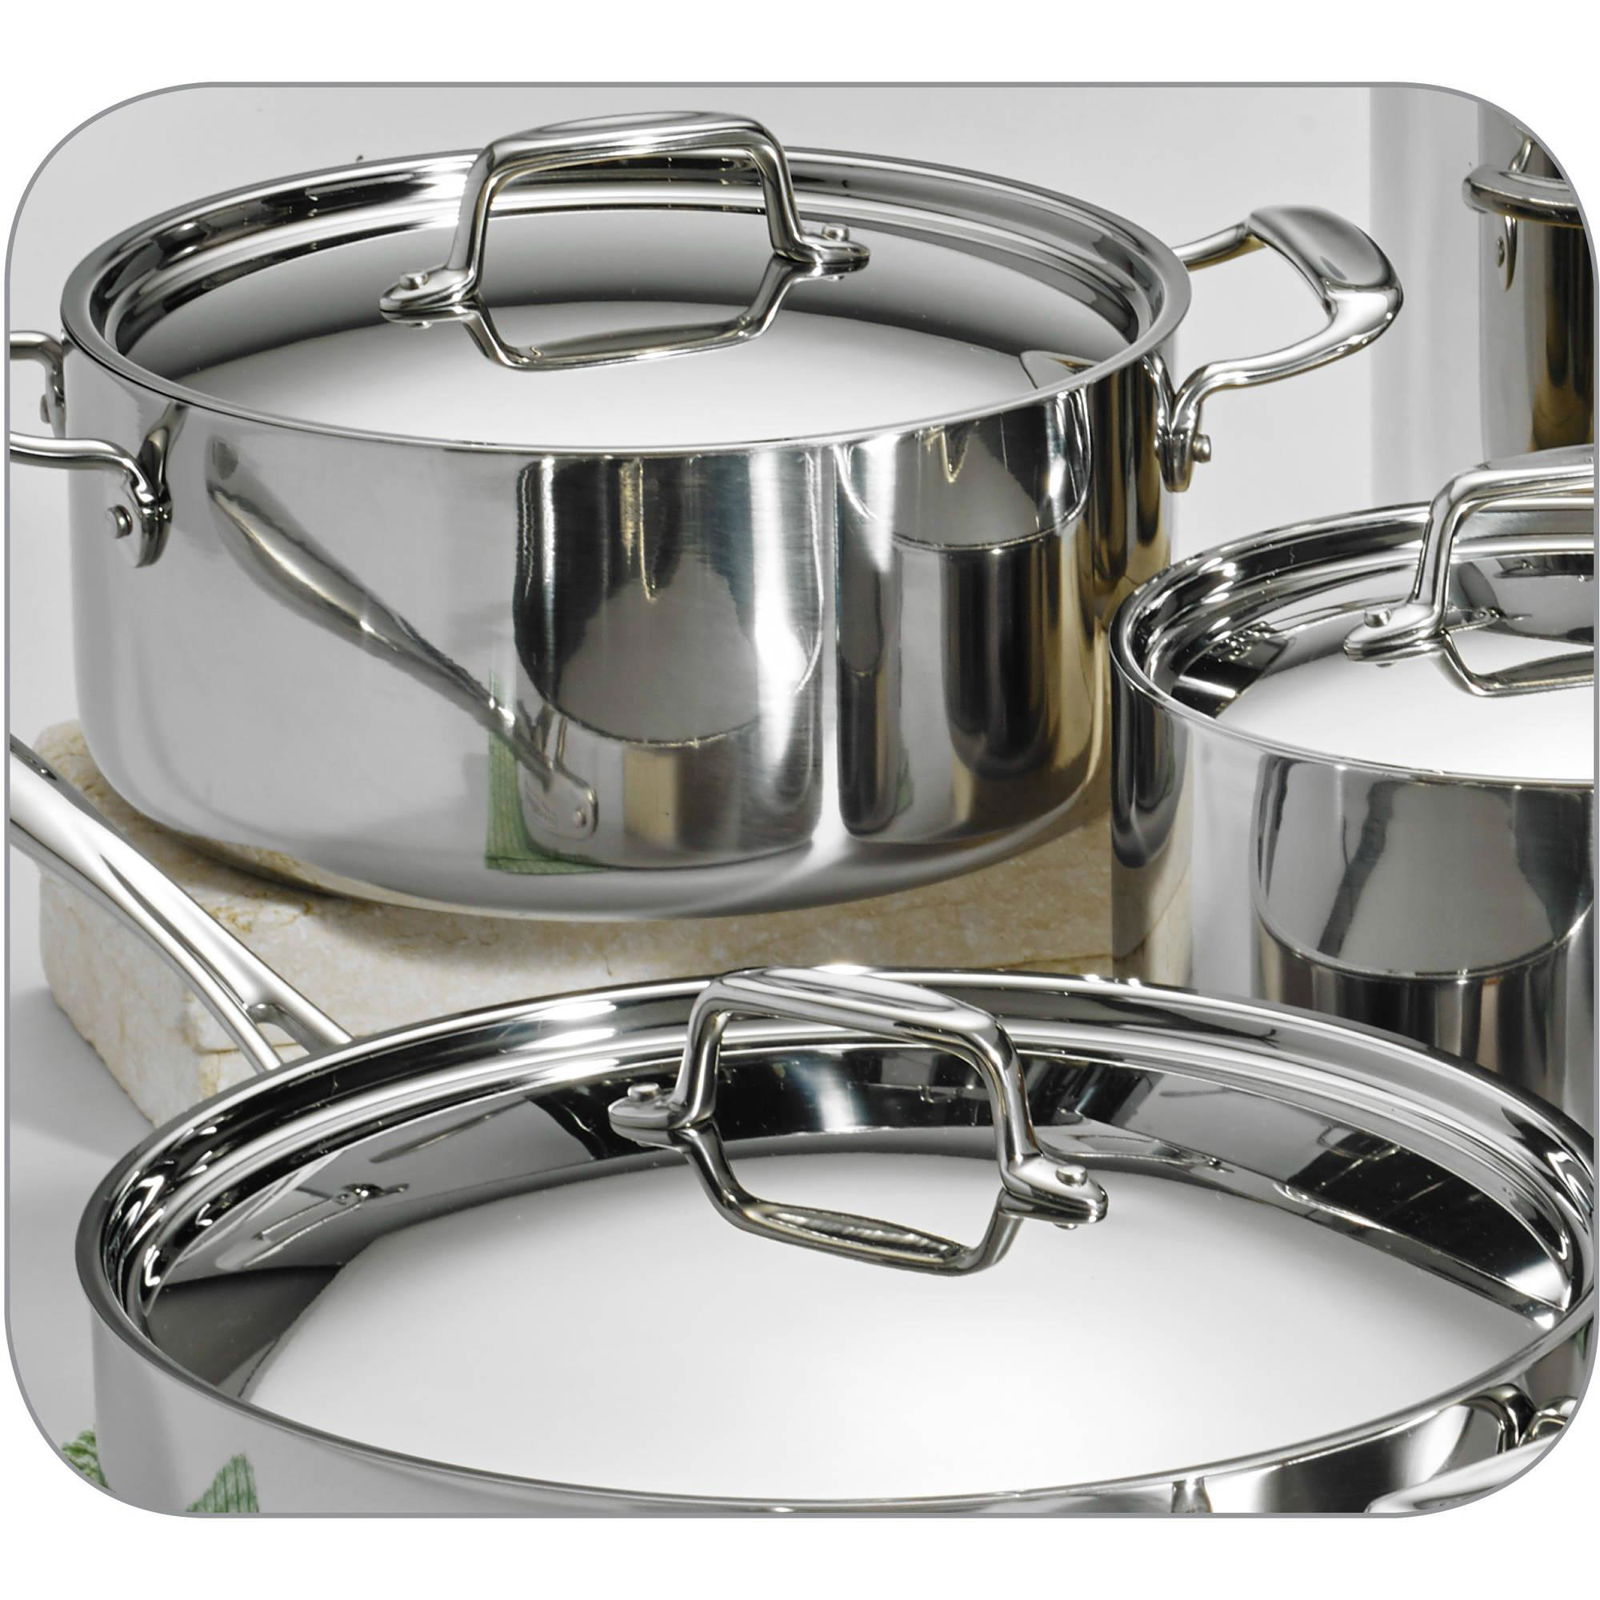 Tri-Ply Stainless Steel Cookware Set 12piece All Clad 4